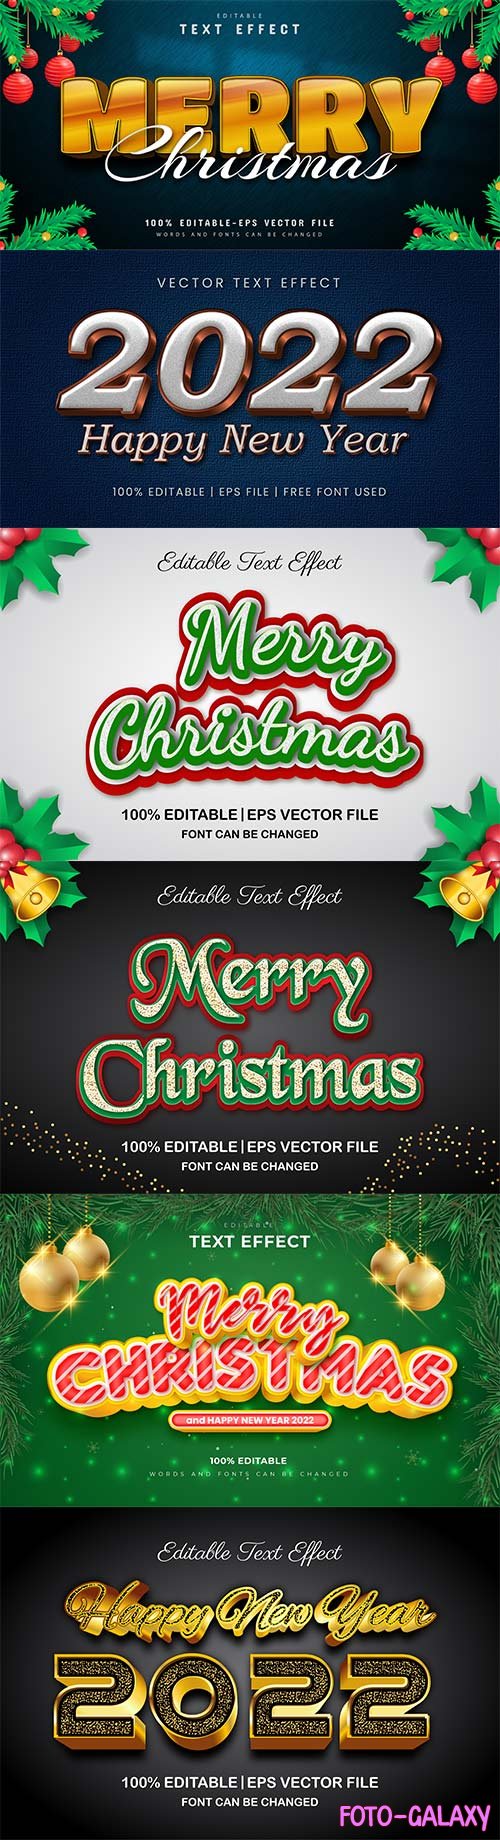 Merry christmas and happy new year 2022 editable vector text effects vol 11